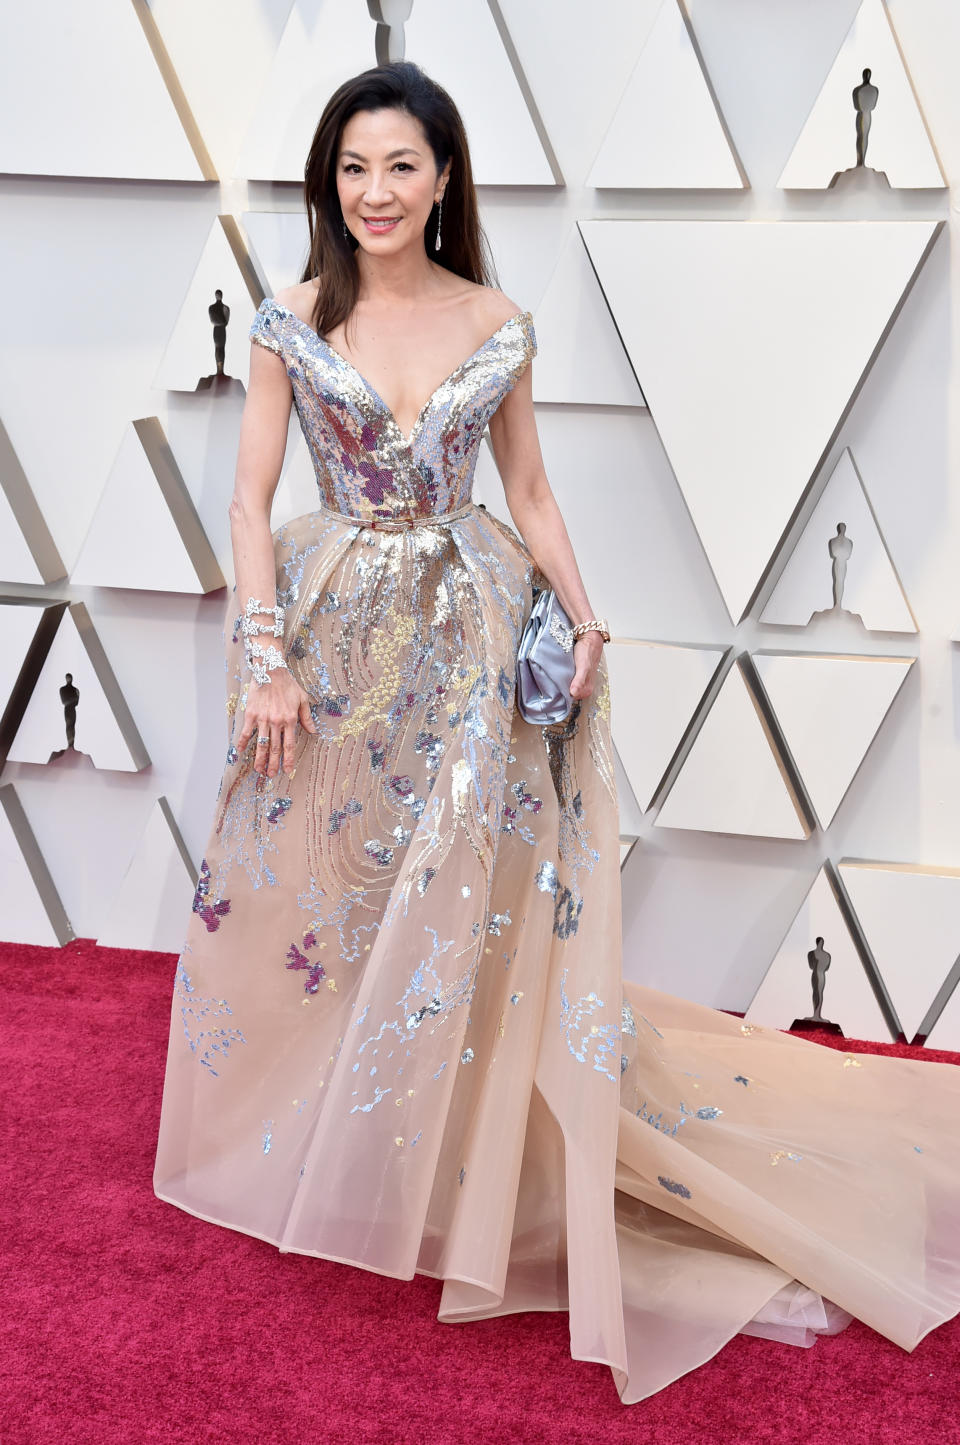 Michelle Yeoh at the Oscars 2019